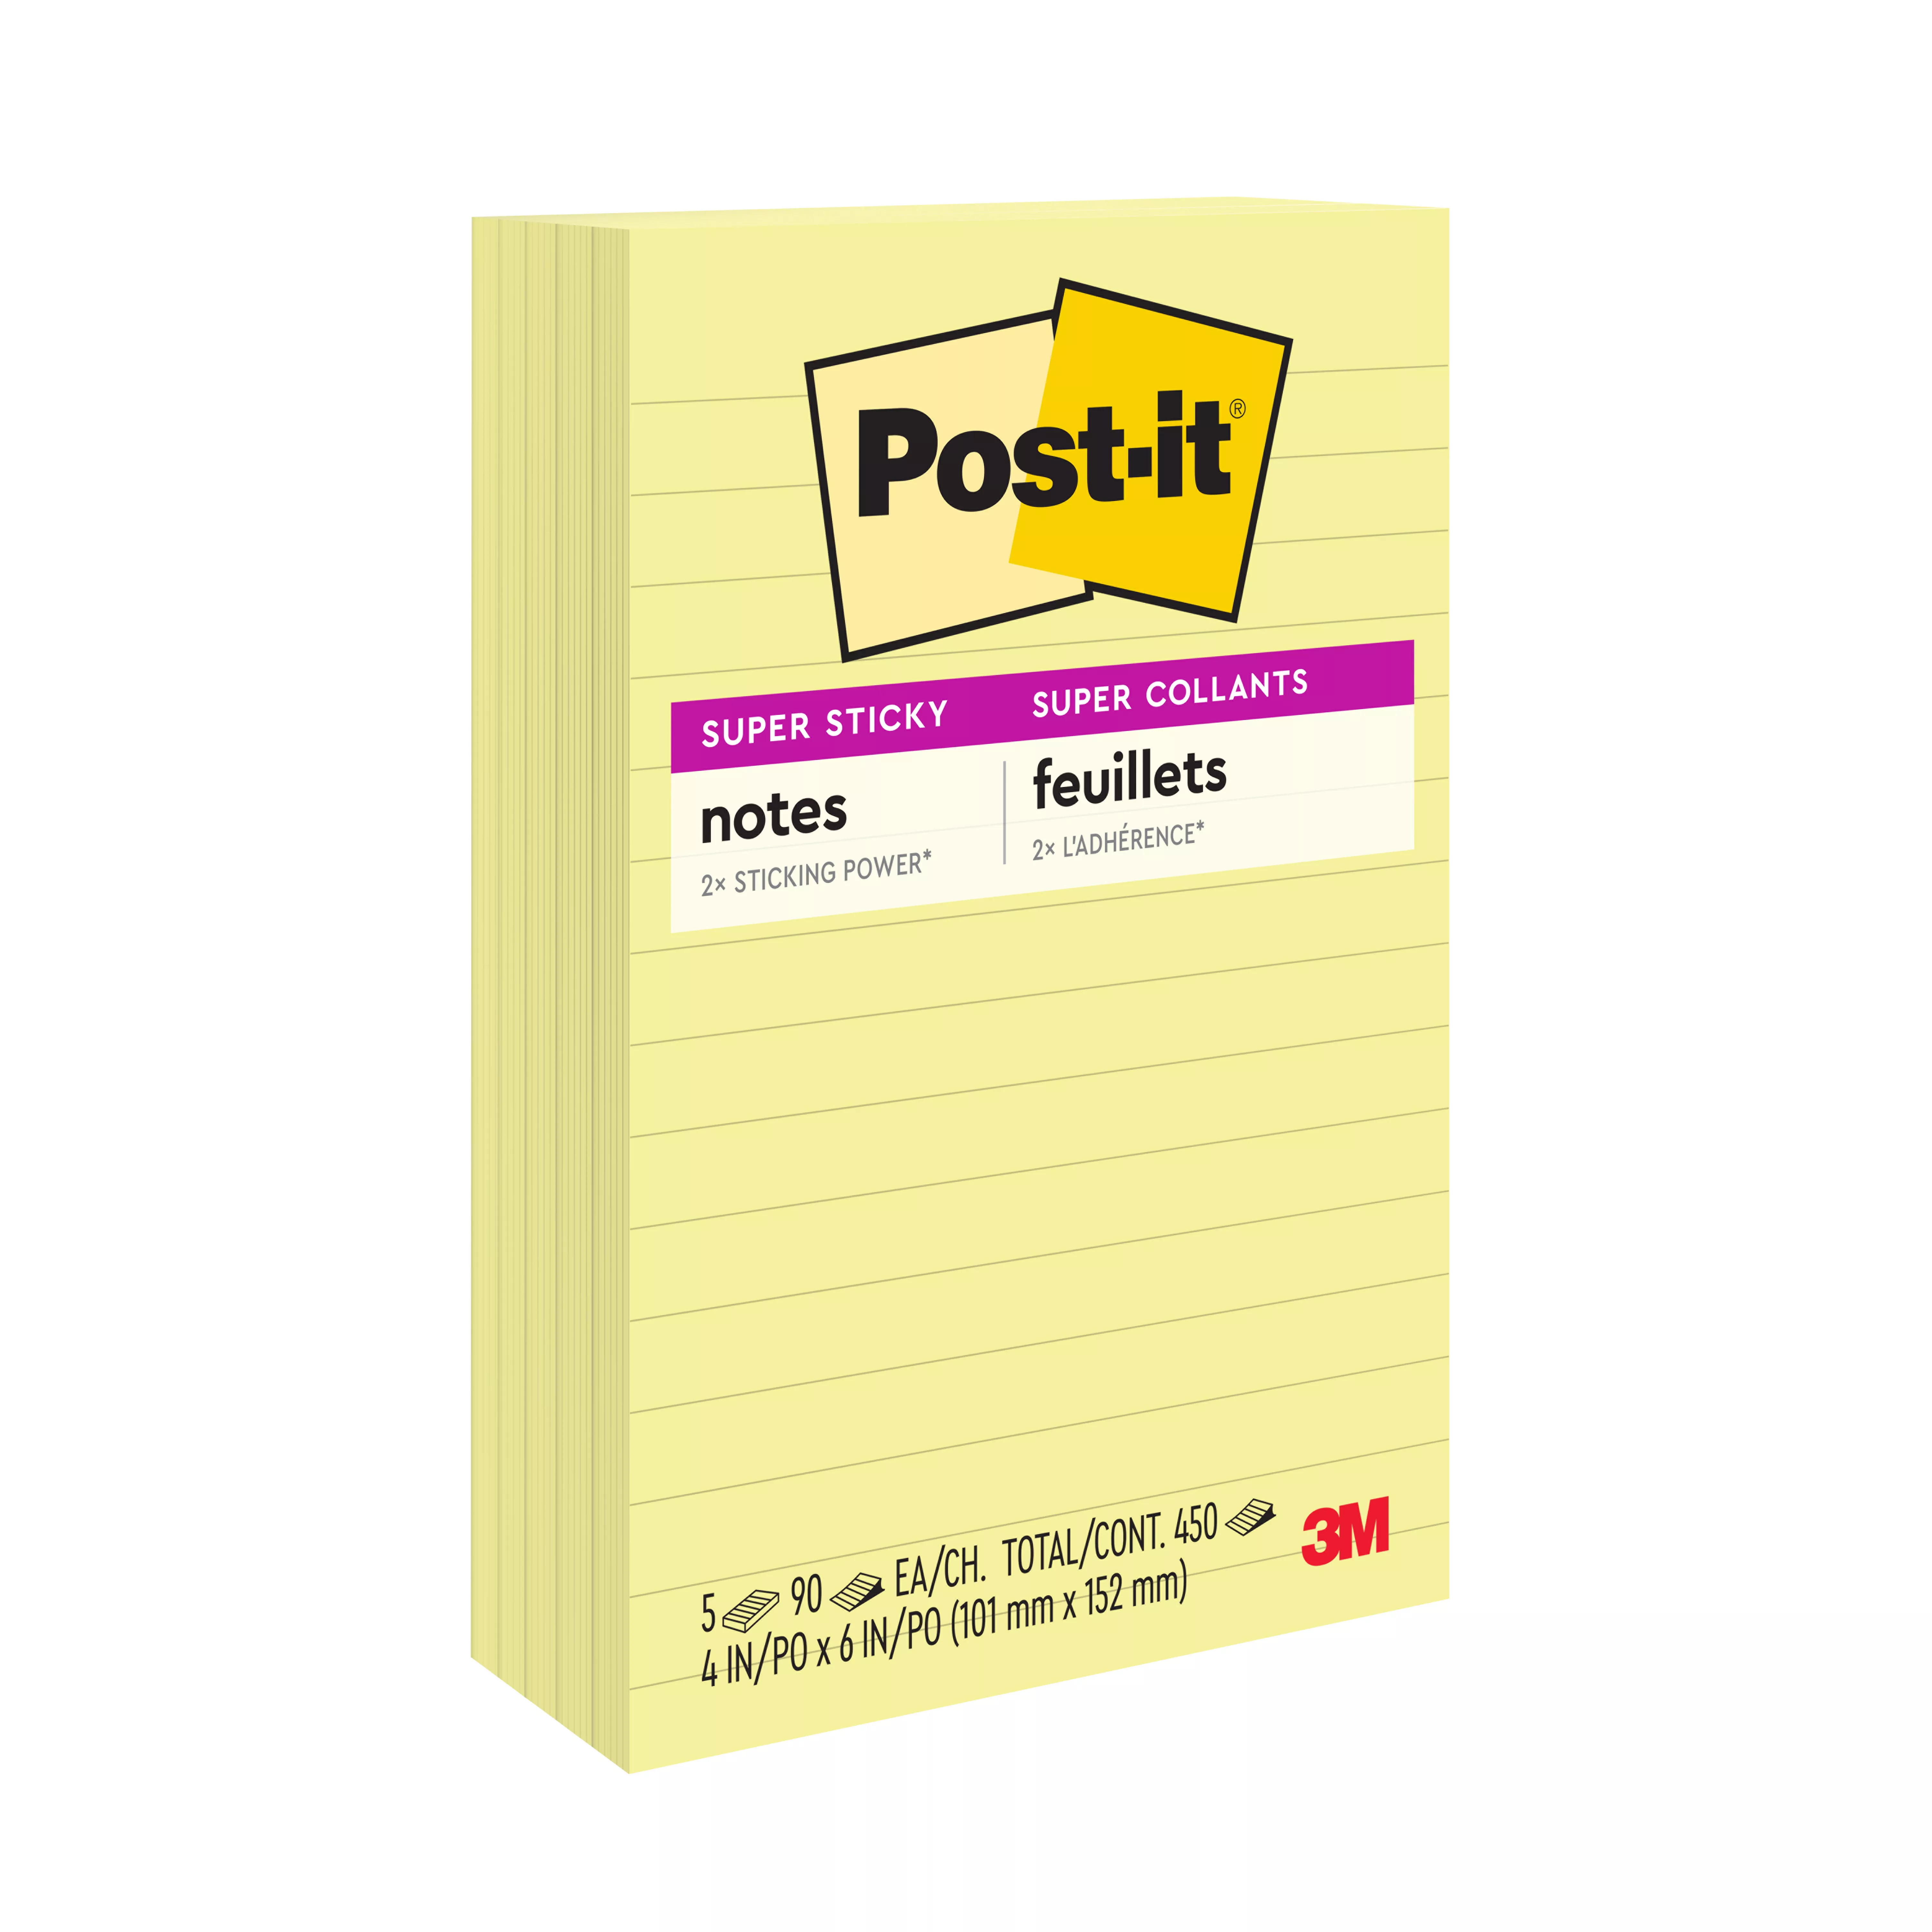 Post-it® Super Sticky Notes 660-5SSCY, 4 in x 6 in (10.16 cm x 15.24 cm) Canary Yellow, lined, 5 pack, 90 sheet pads